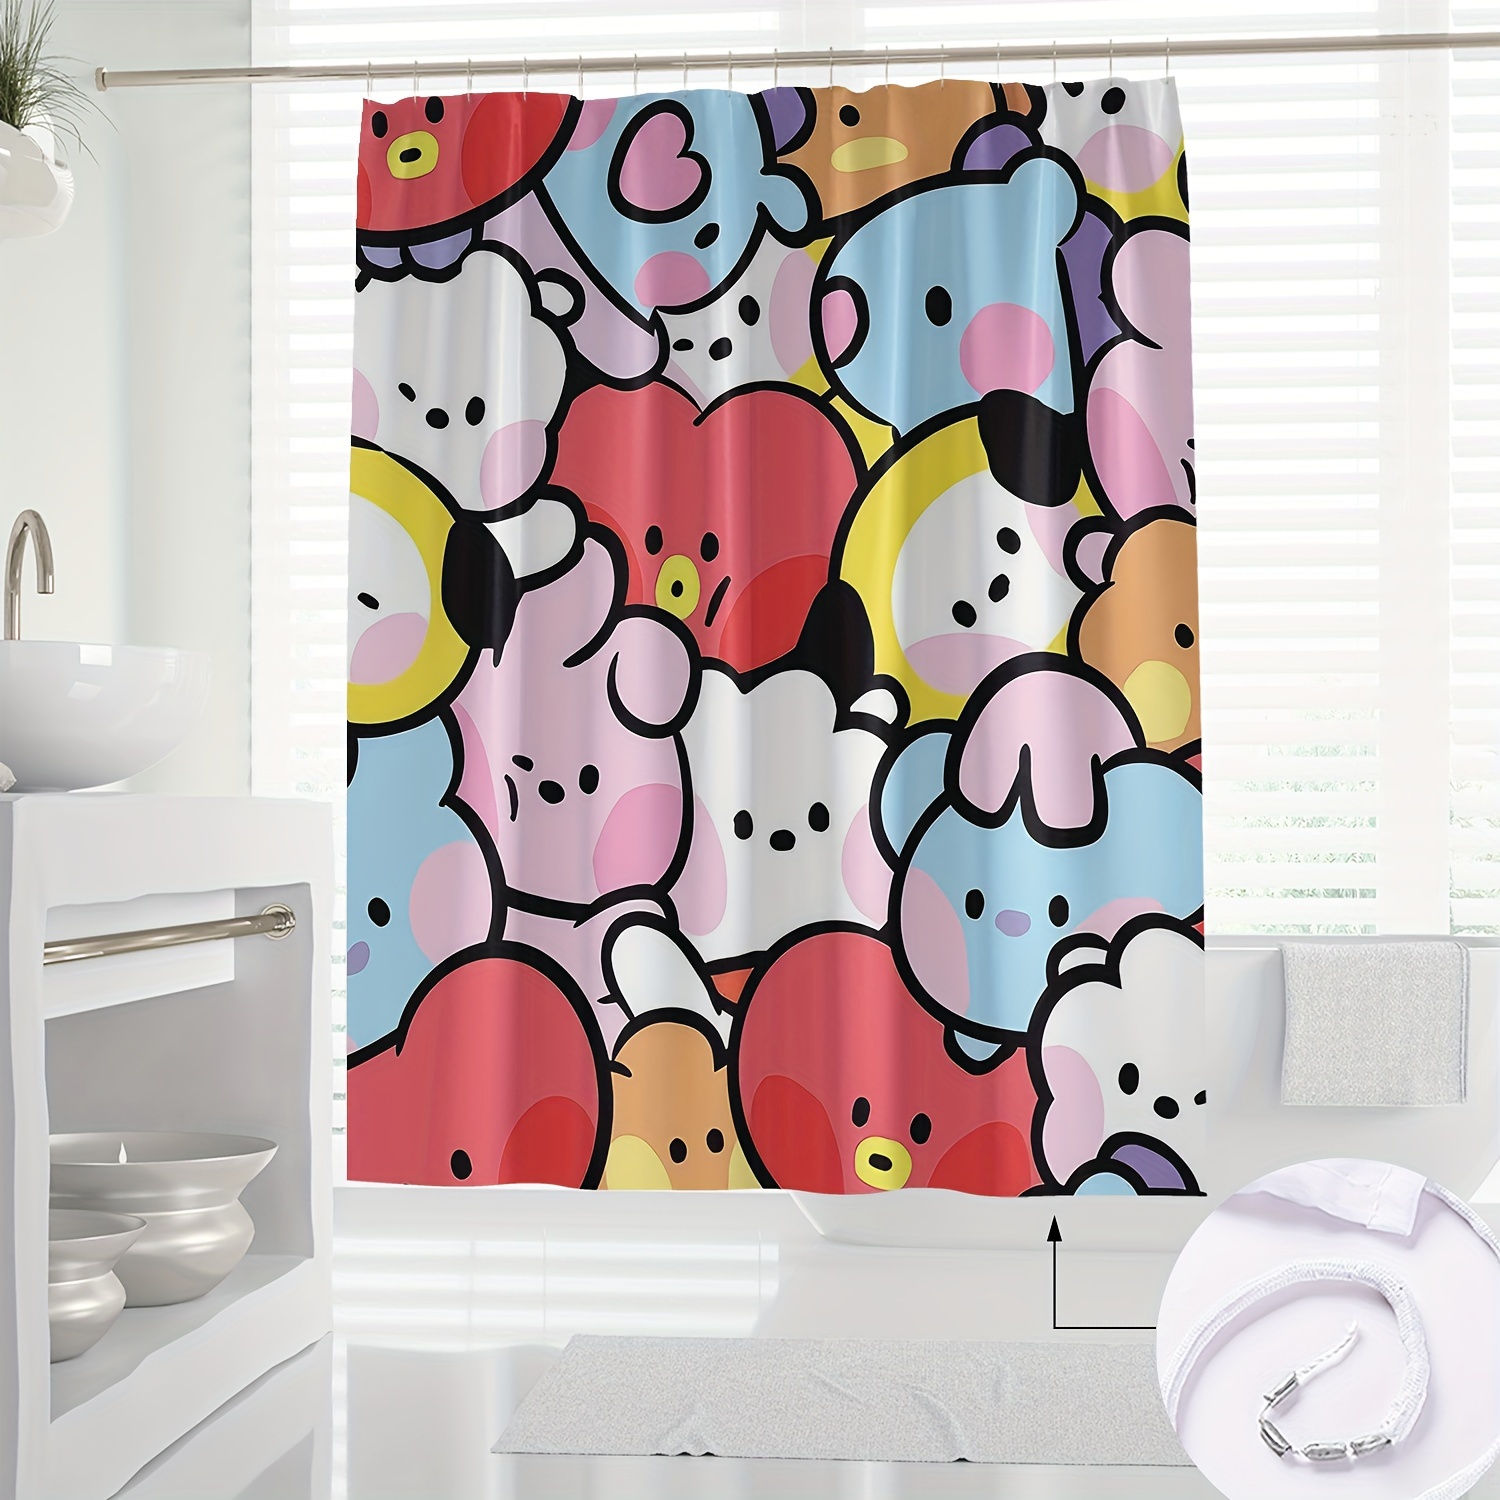 

Bts Cartoon Shower Curtain: 180cm/70.87in X 180cm/70.87in, Waterproof, Partial Lining, Artistic Design, Knit Fabric, Suitable For All Seasons